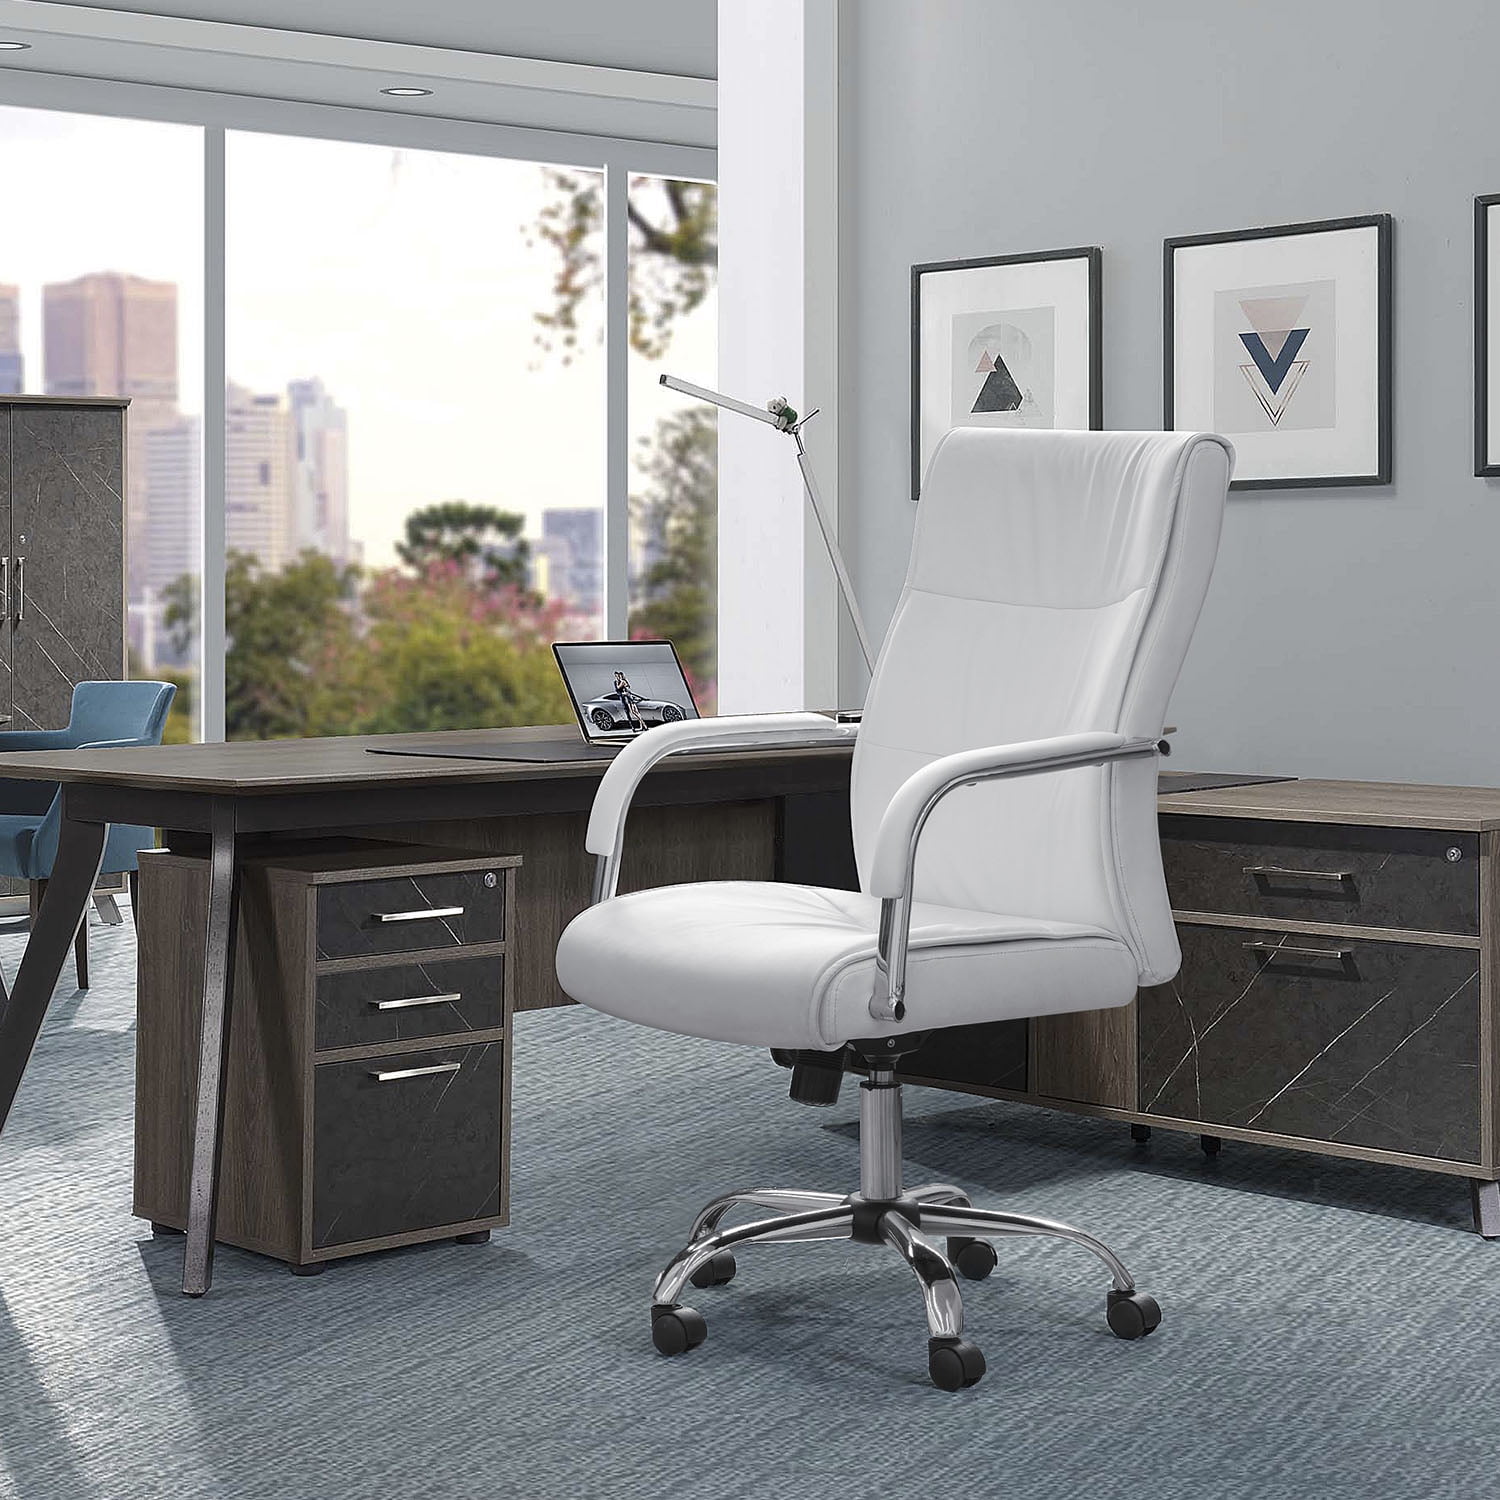 Lacoo Faux Leather High-Back Executive Ergonomic Office Desk Chair, White 